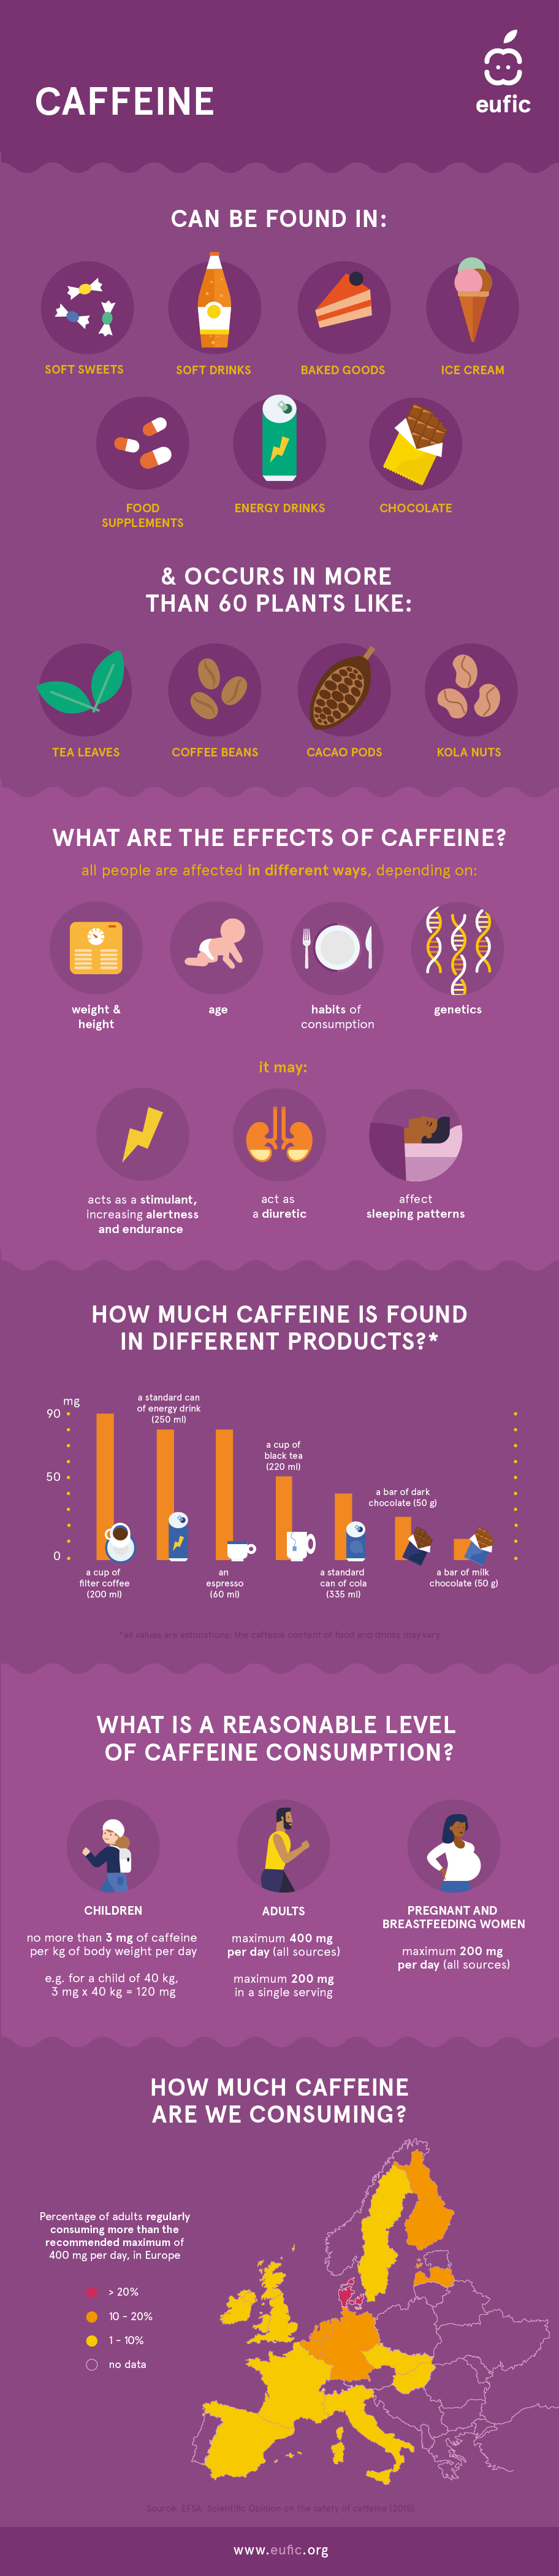 Infographic about caffeine